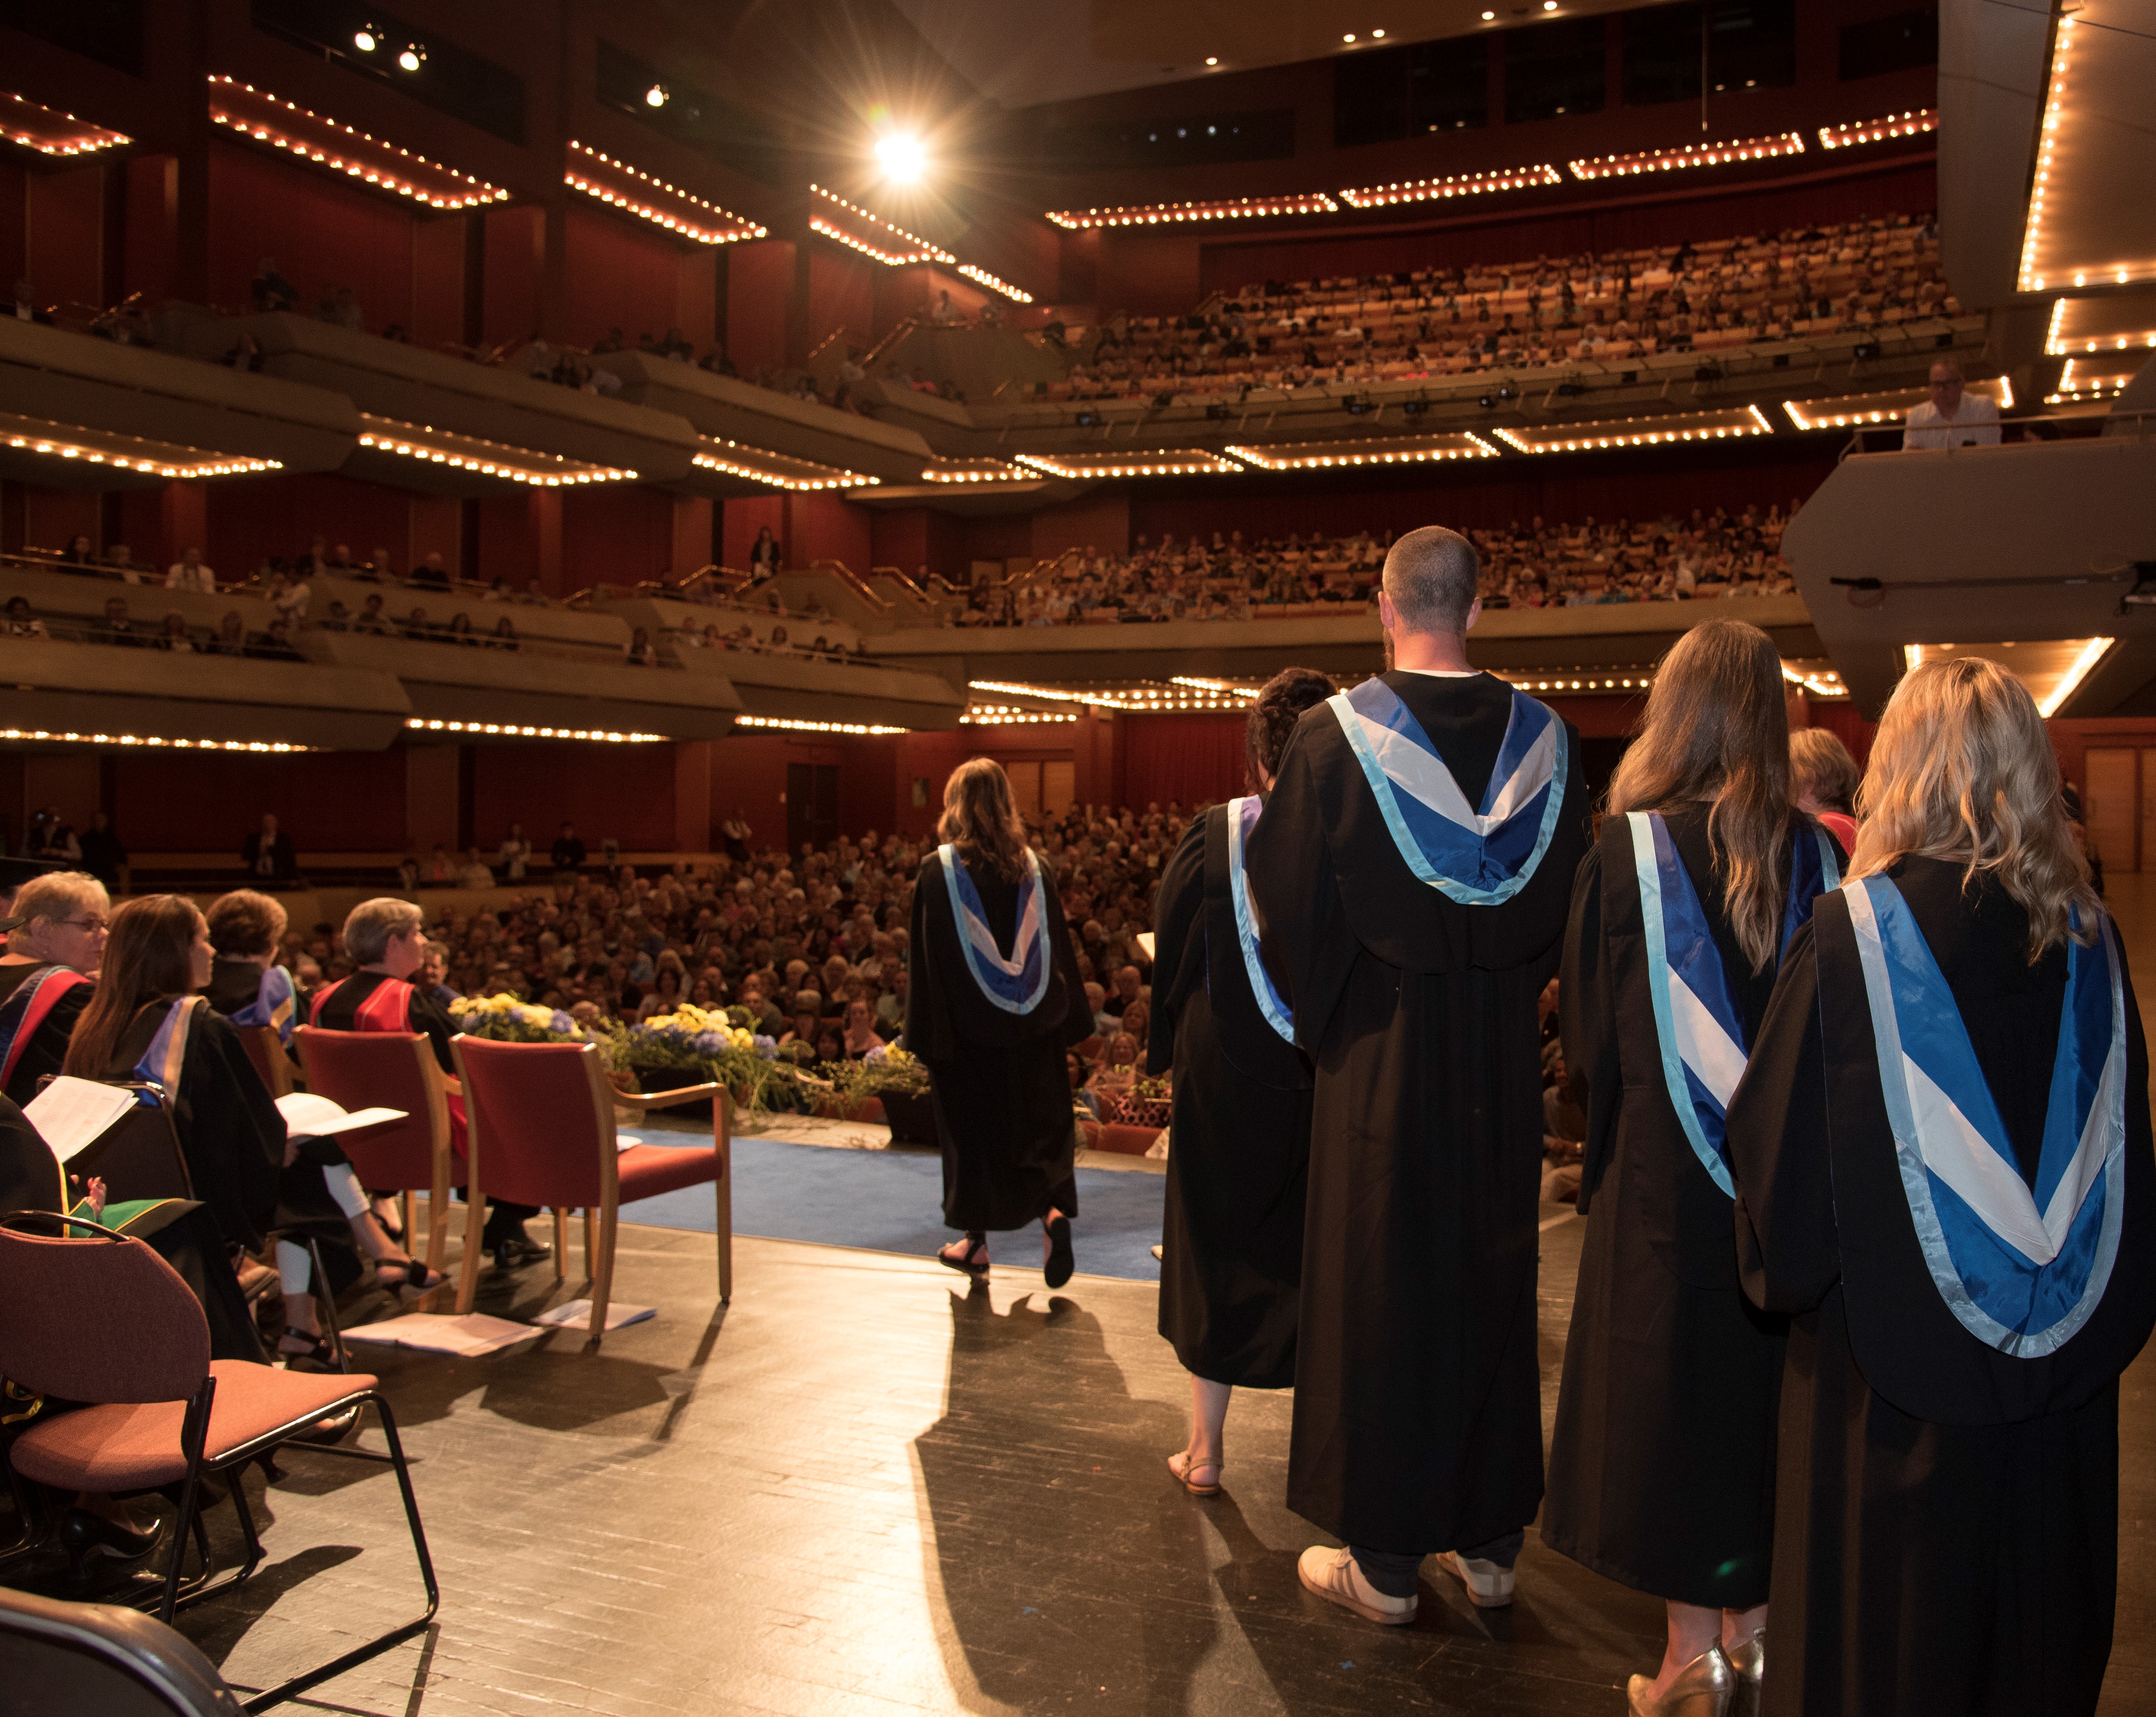 Back view of Lakehead students in robes walking across stage to receive diplomas